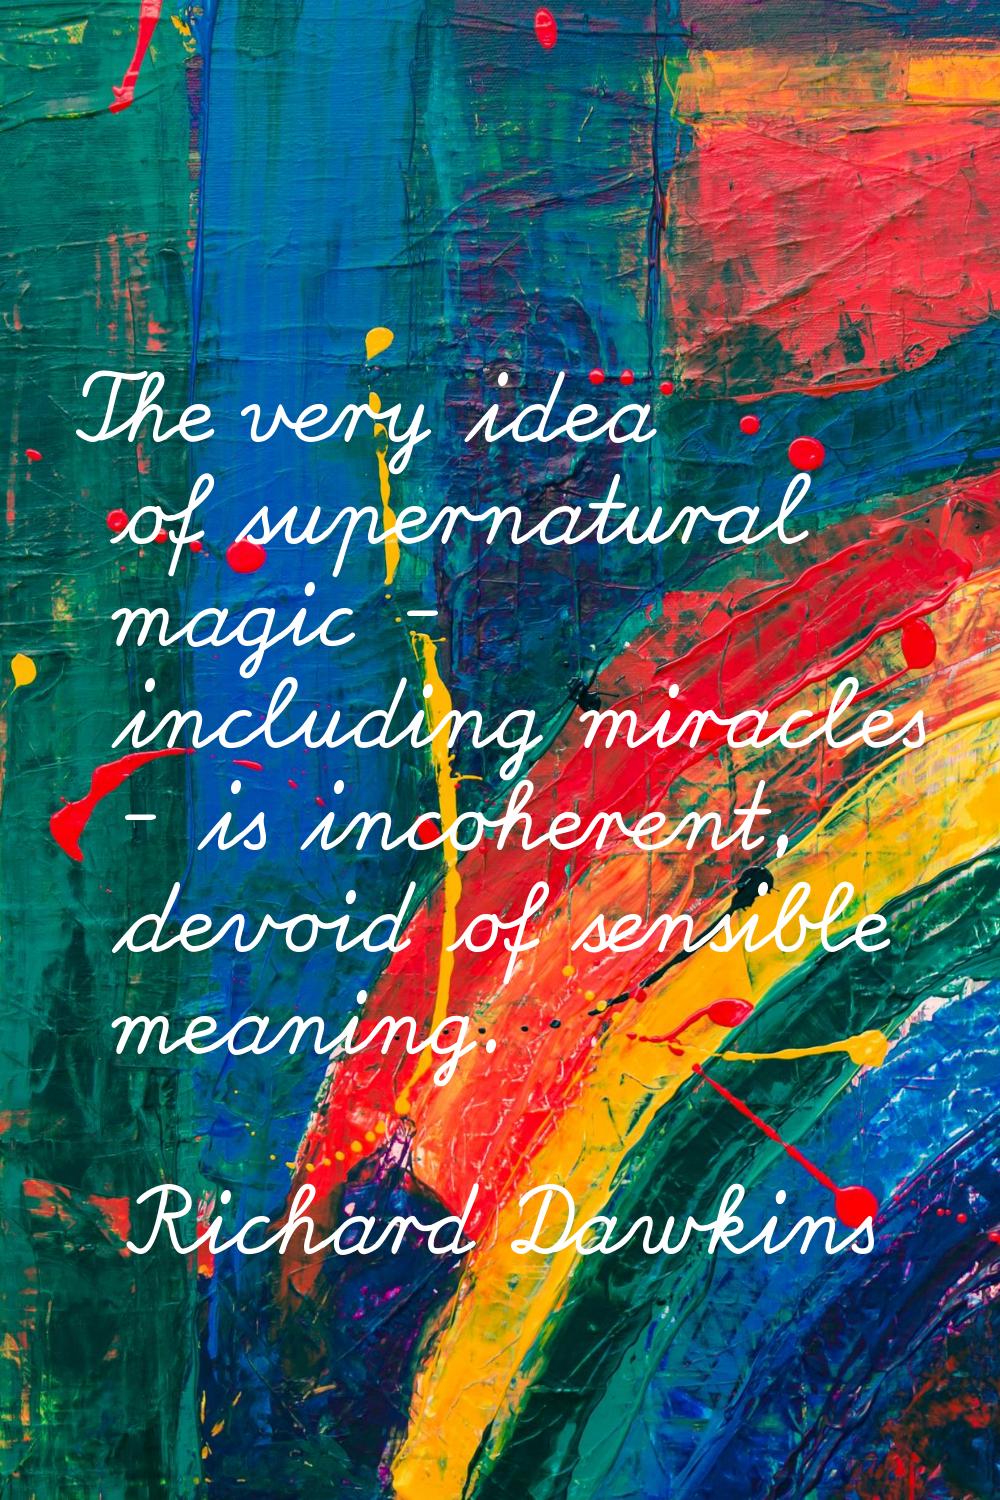 The very idea of supernatural magic - including miracles - is incoherent, devoid of sensible meanin